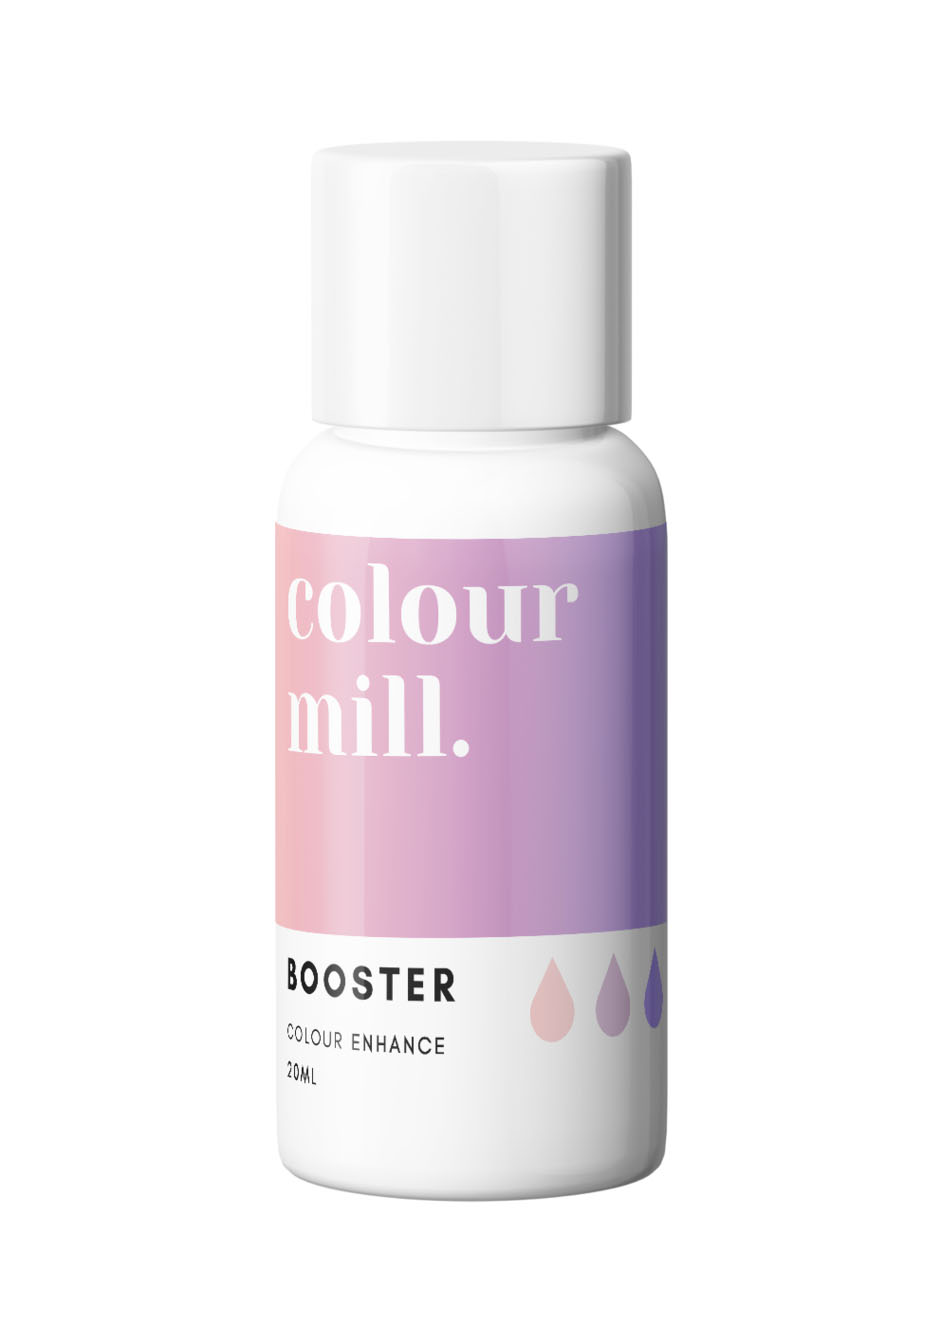 Colour Mill Booster Colouring 20ml